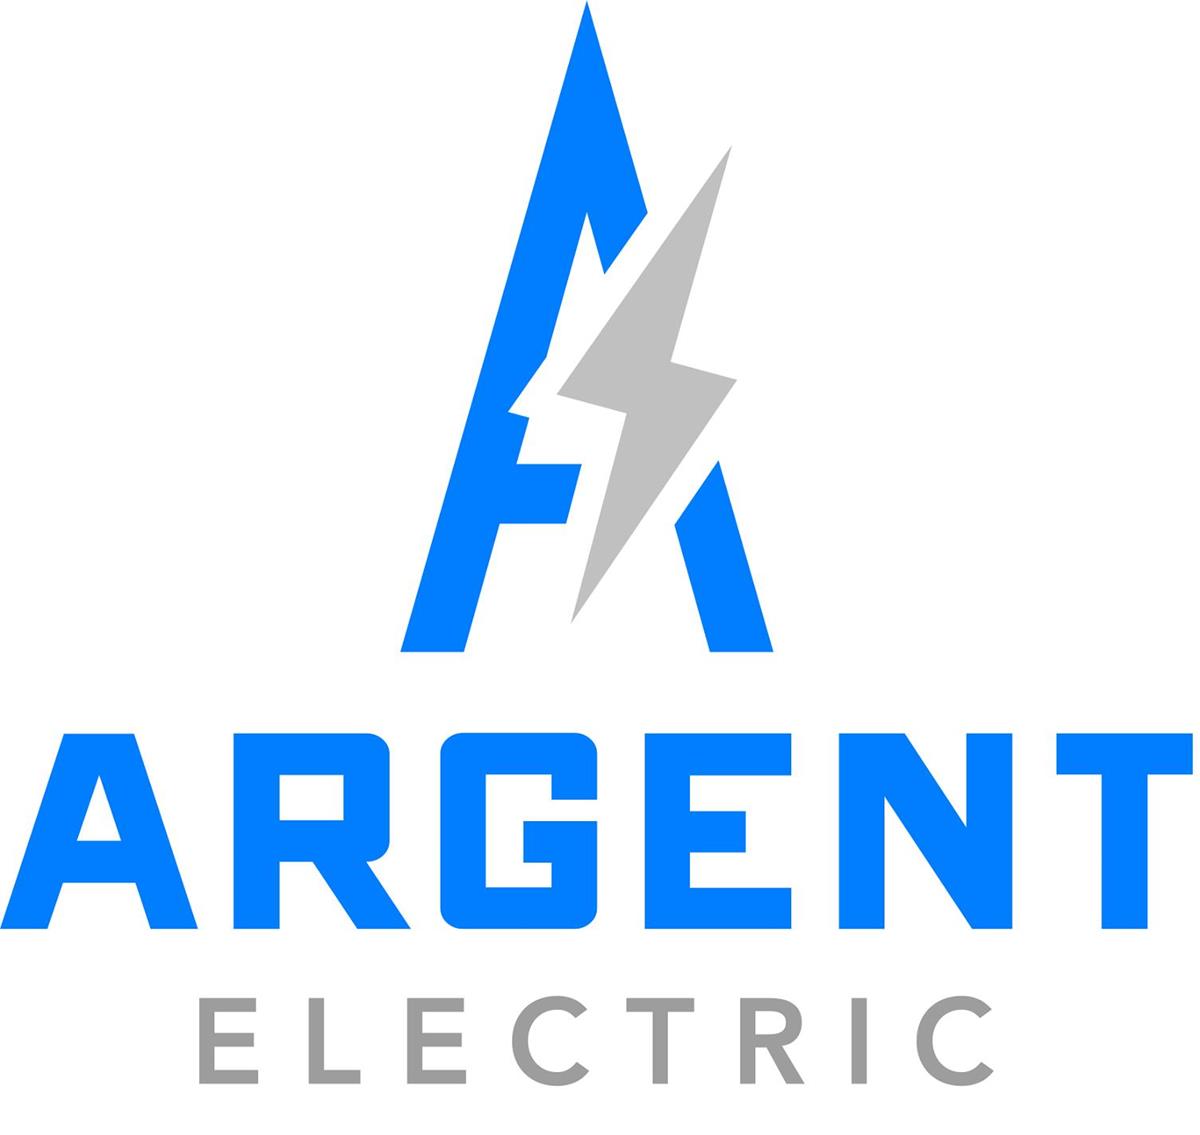 Argent Electric LLC partners with Tulsa Speedway and USRA Modifieds